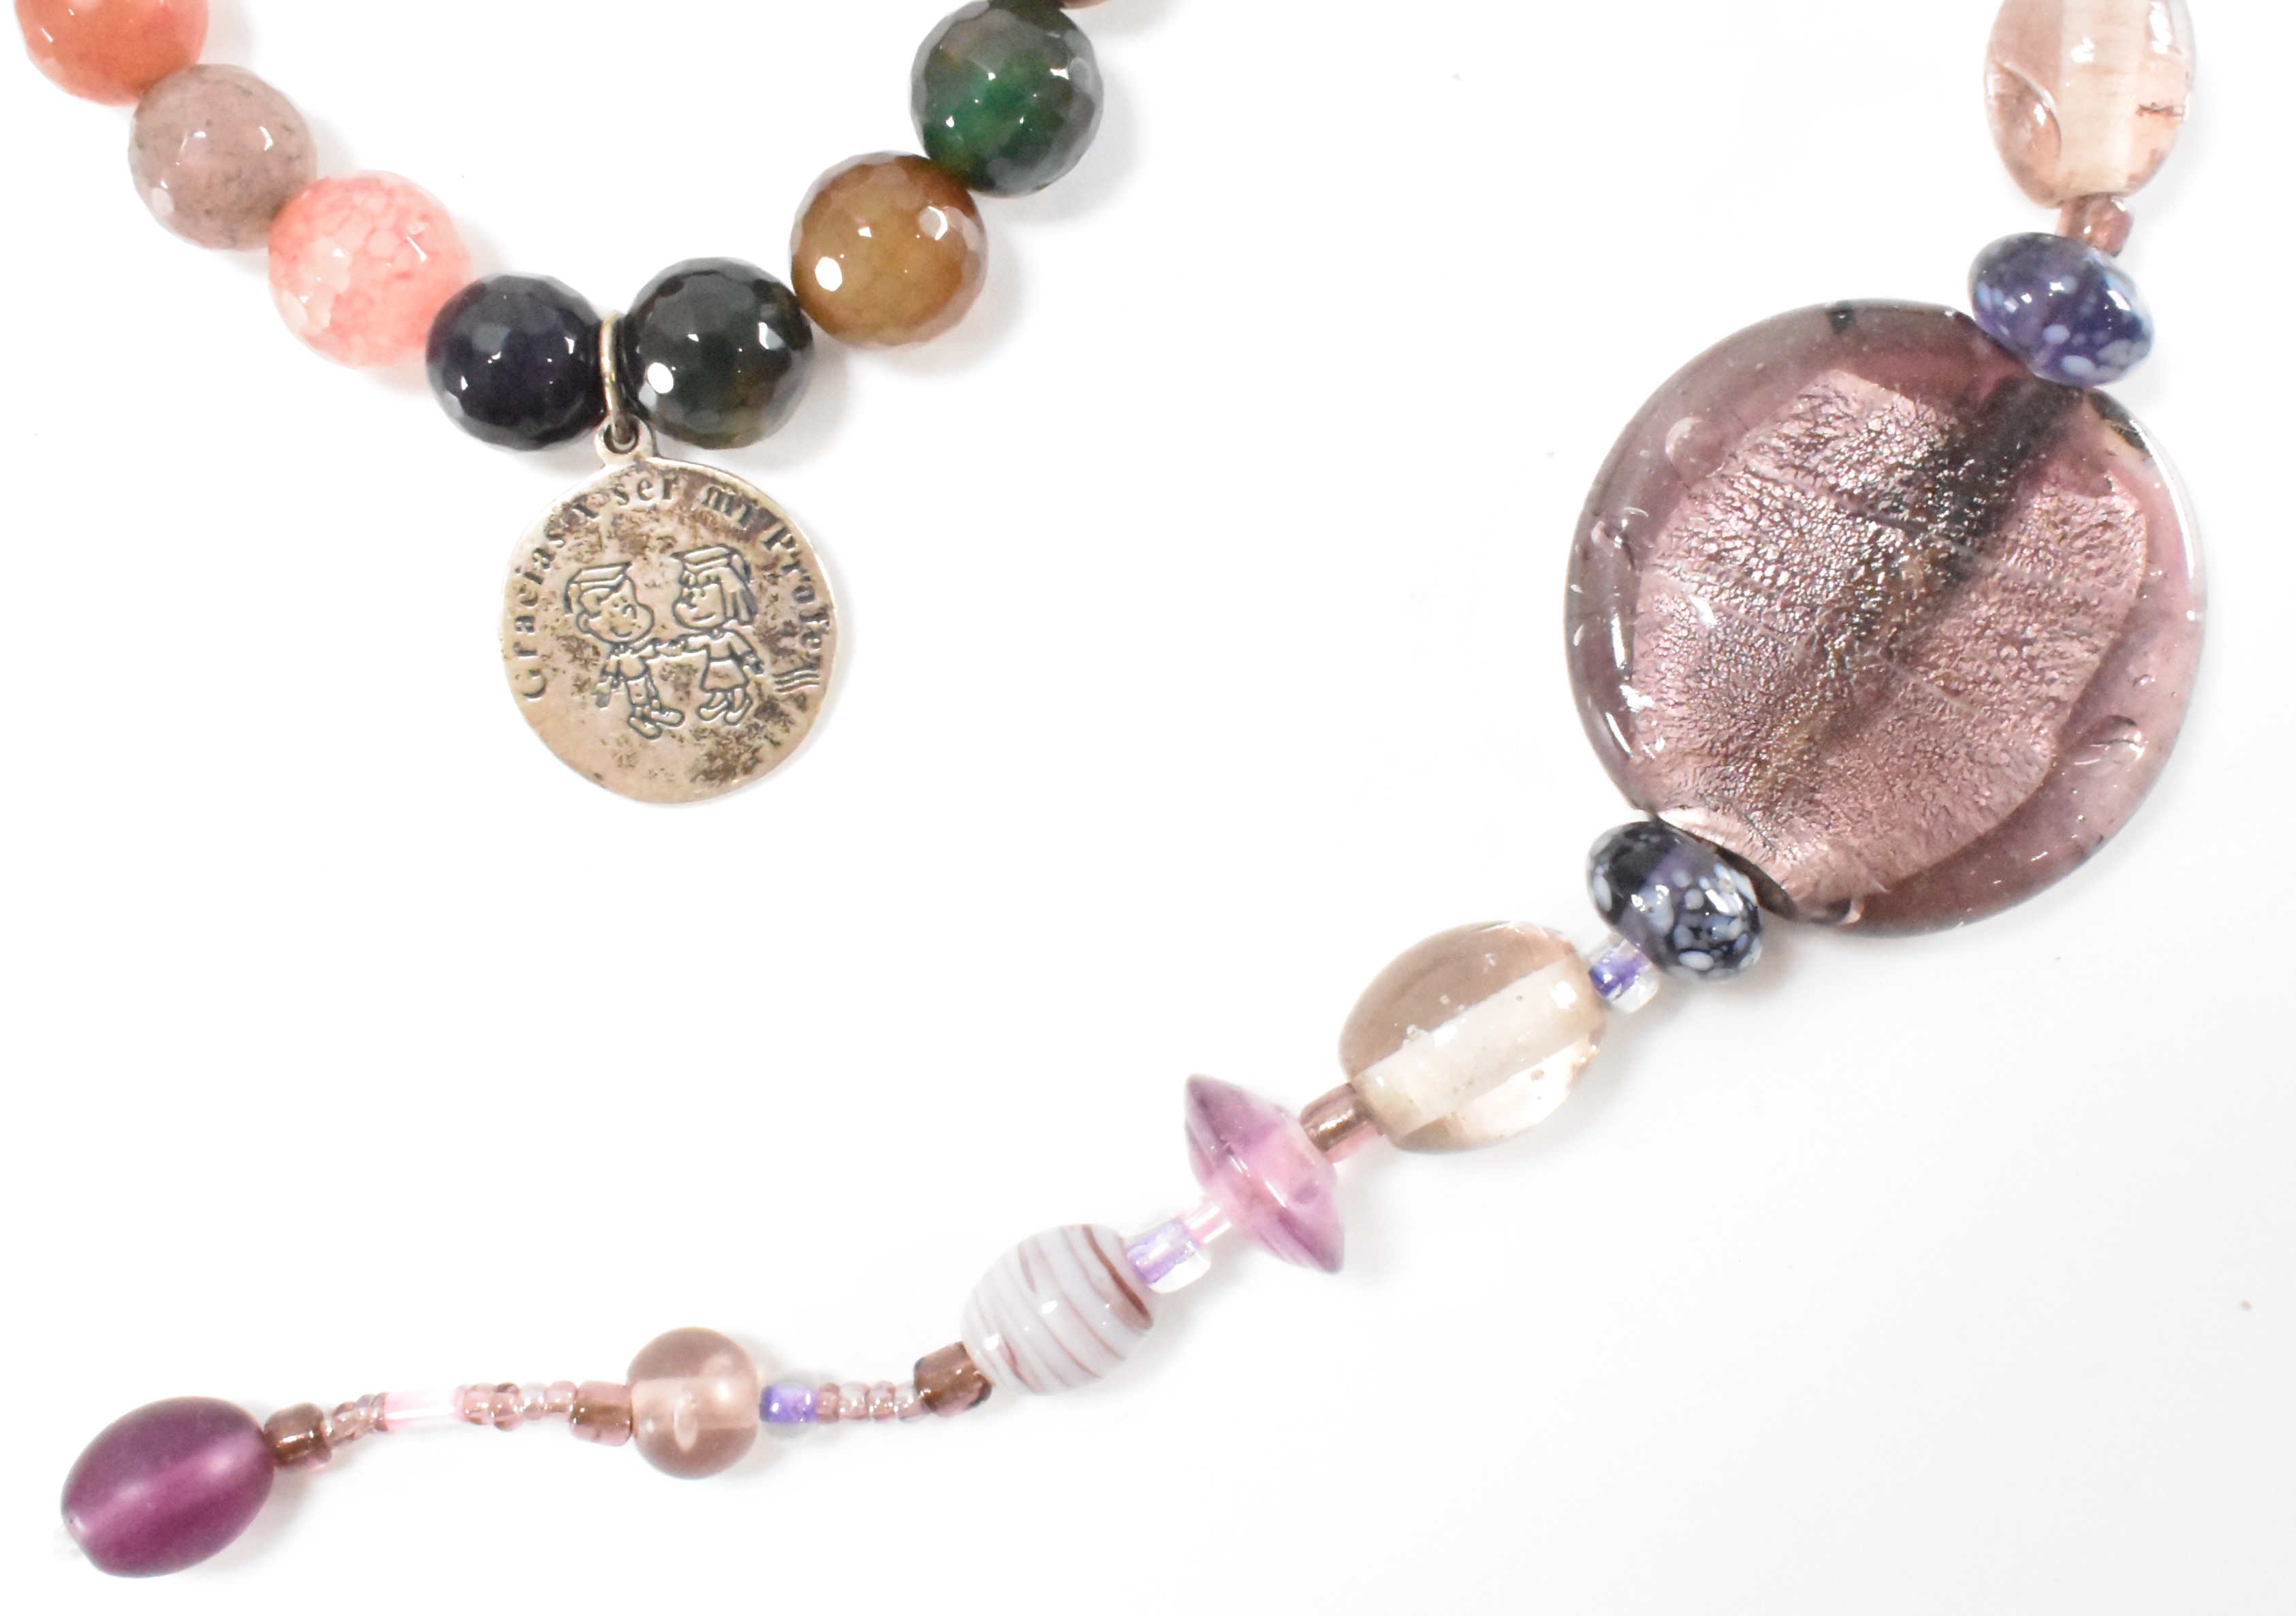 GROUP OF VINTAGE GLASS BEAD NECKLACES - Image 9 of 9